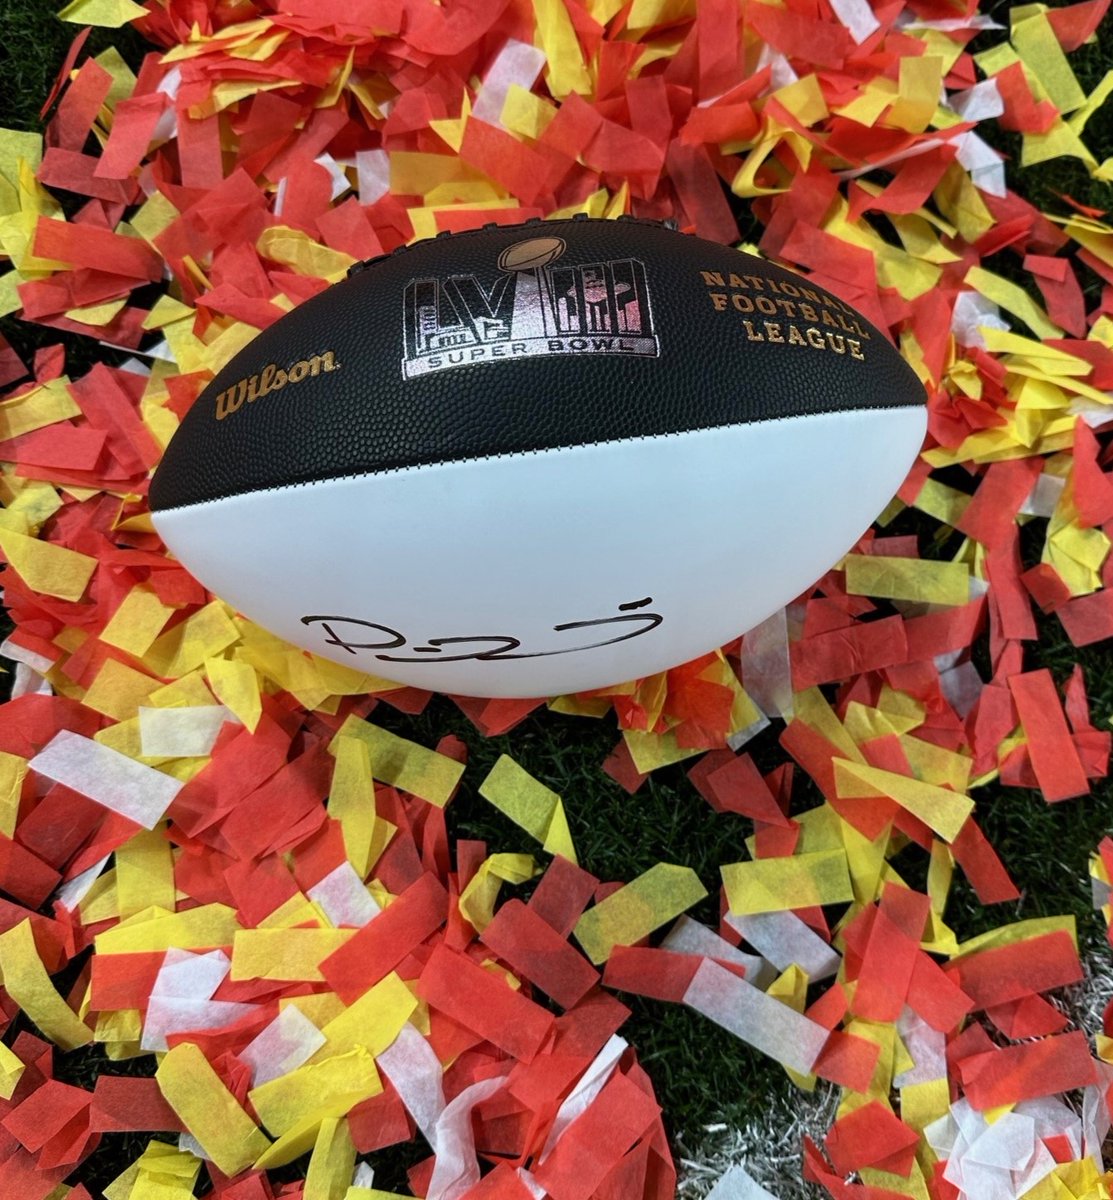 We have items up for auction signed by Super Bowl MVP Patrick Mahomes, Super Bowl Halftime performer Usher, and Super Bowl Pregame performers Reba, Post Malone, and Andra Day! Visit NFL.com/auction to bid now! #SuperBowl #SBLVIII #Chiefs